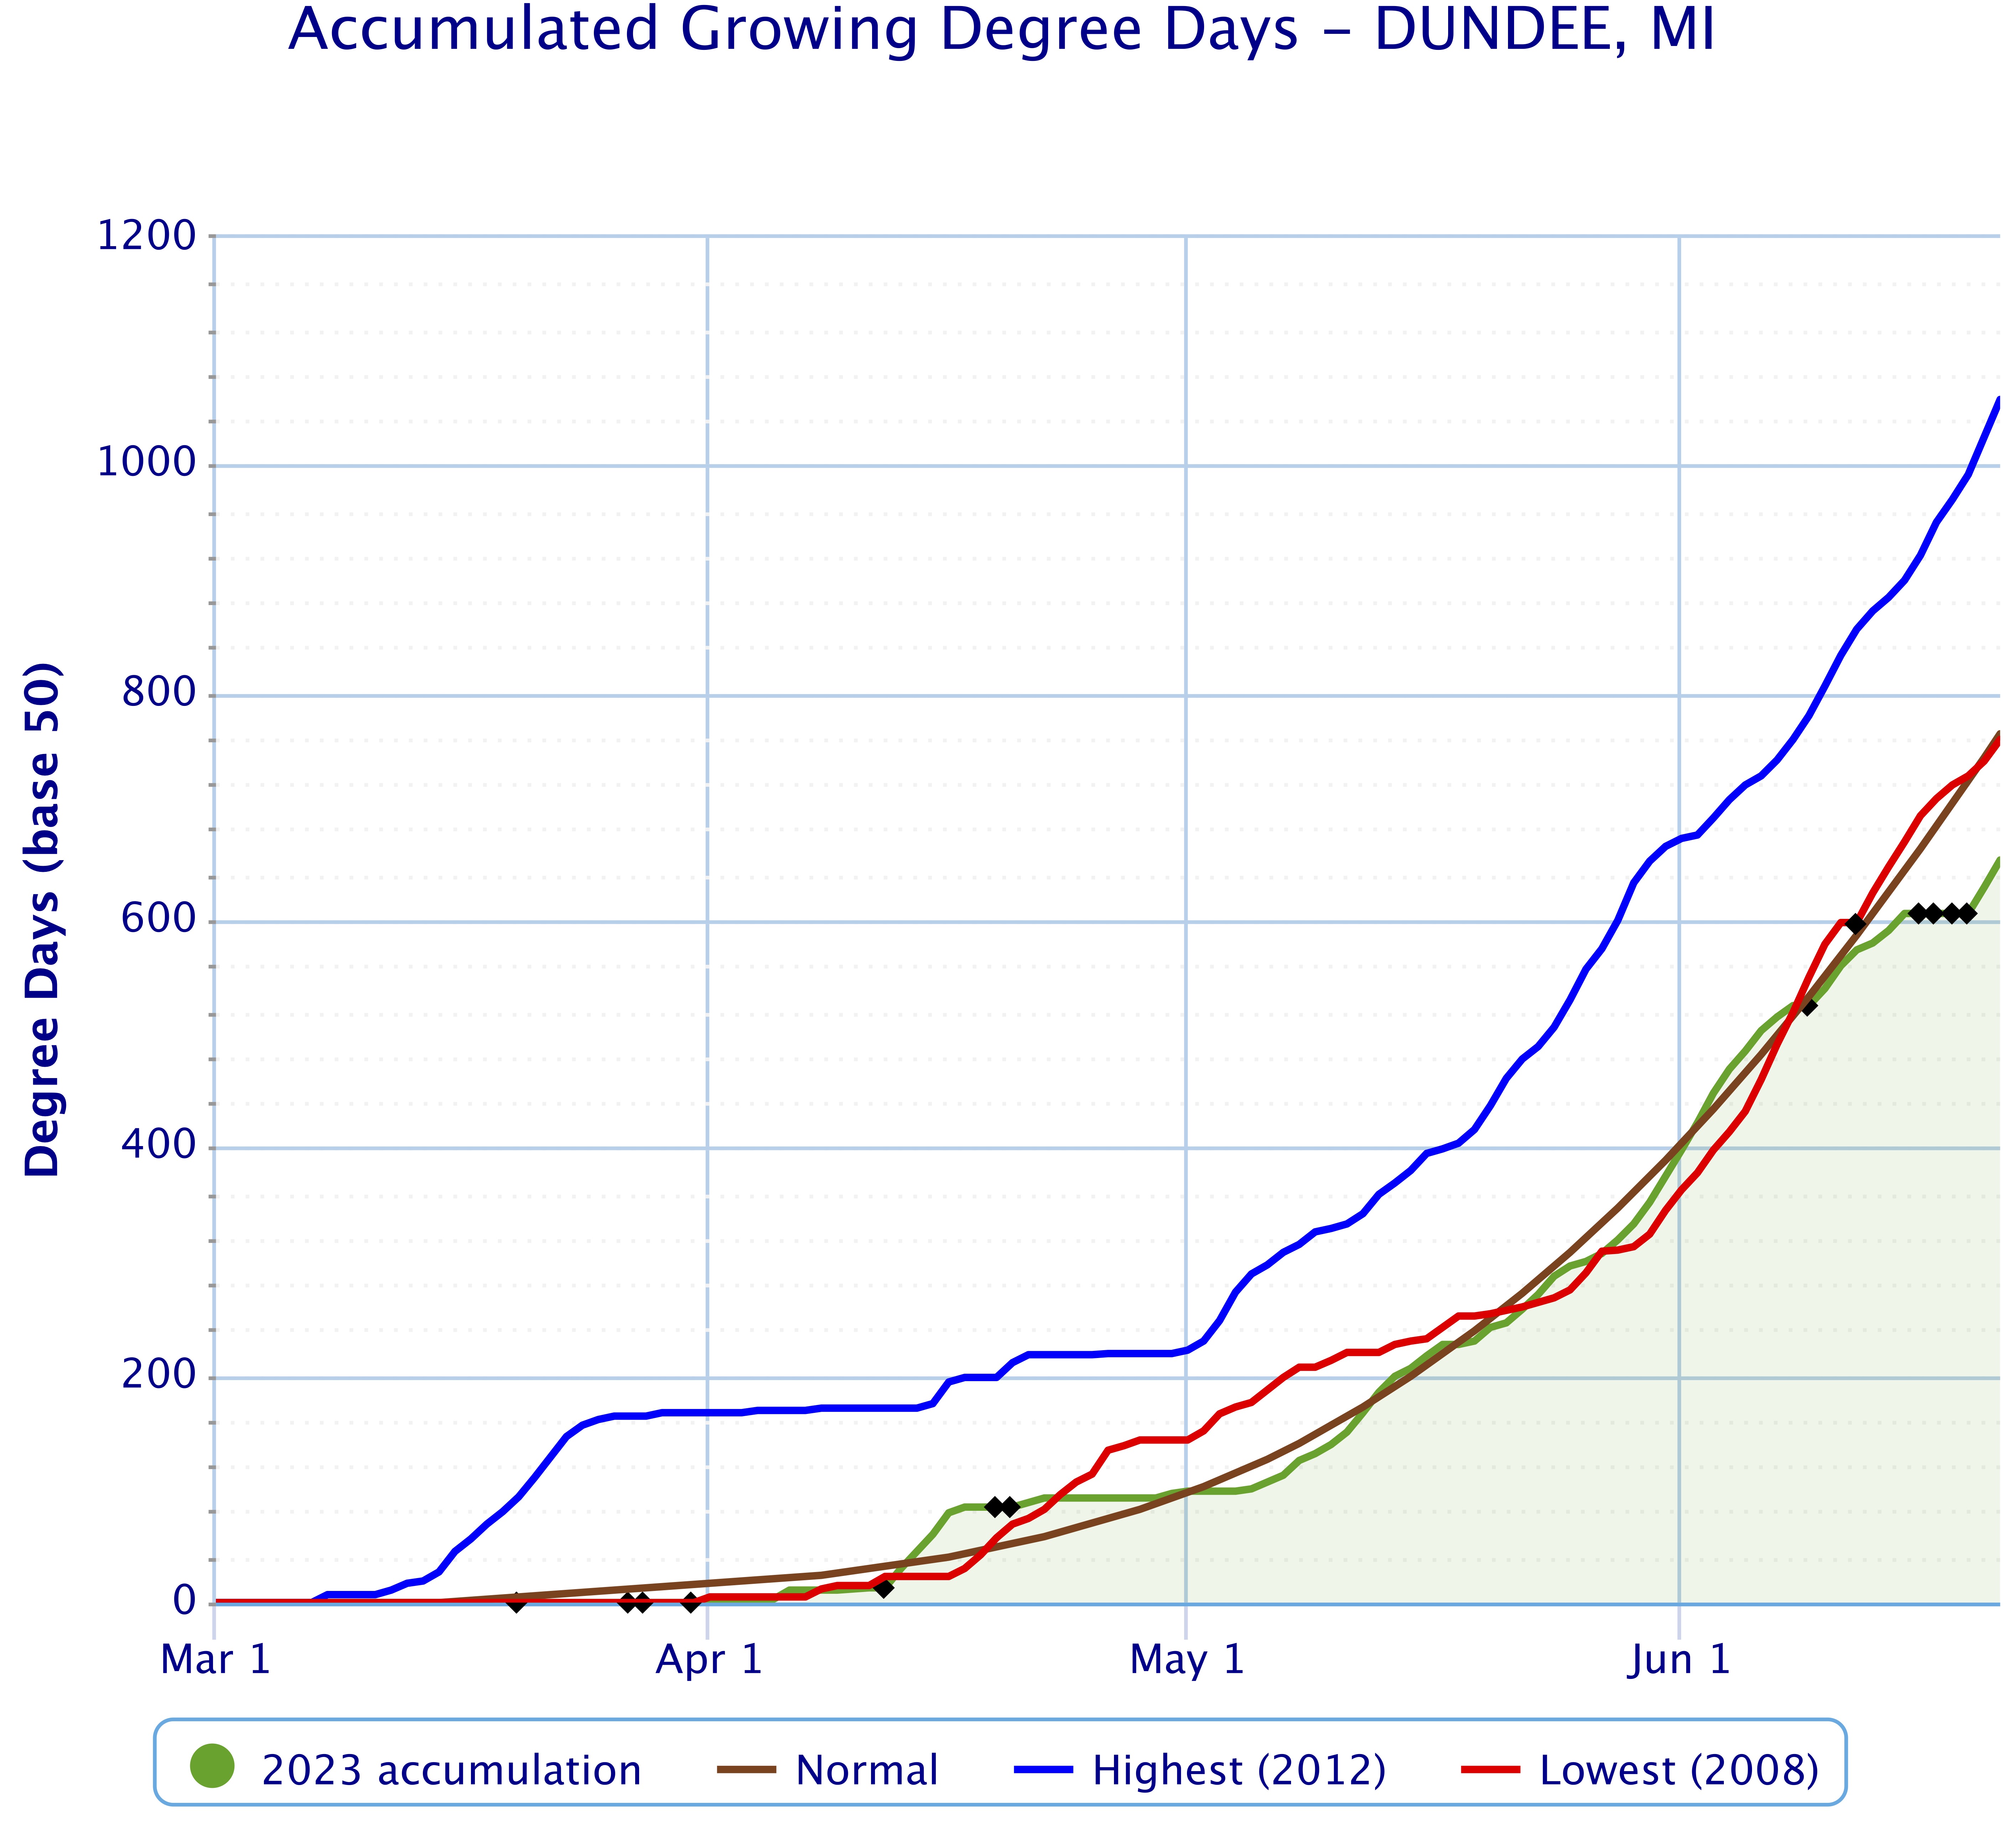 Accumulated Growing Degree Day Chart that shows accumulated growing degree days (Base 50) compared to highest, lowest, and normal.